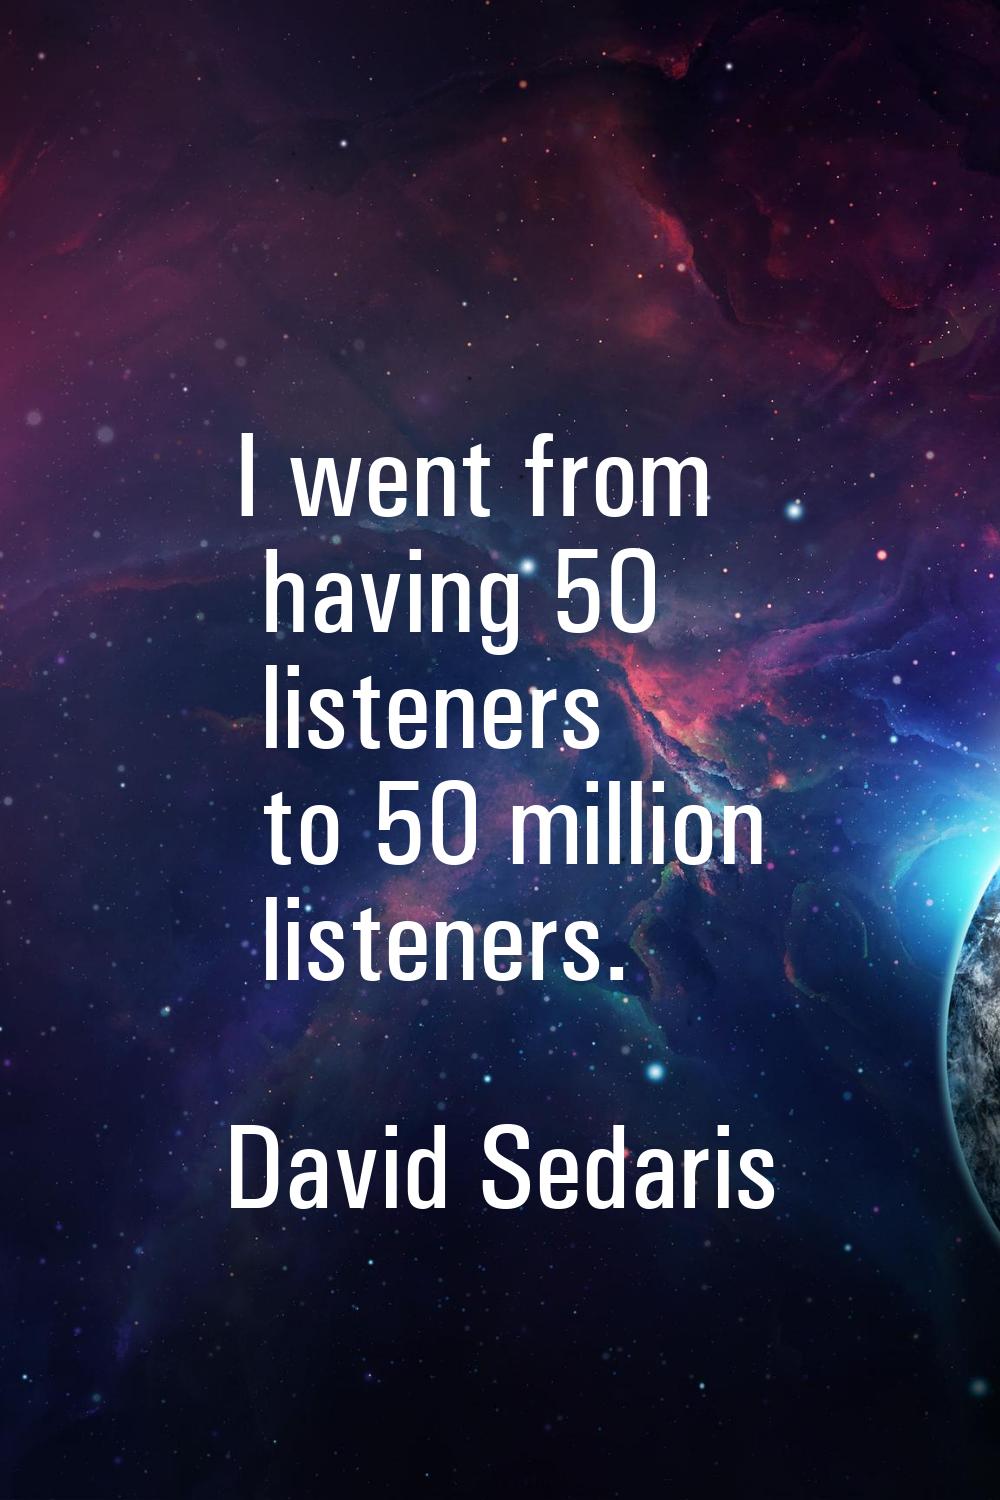 I went from having 50 listeners to 50 million listeners.